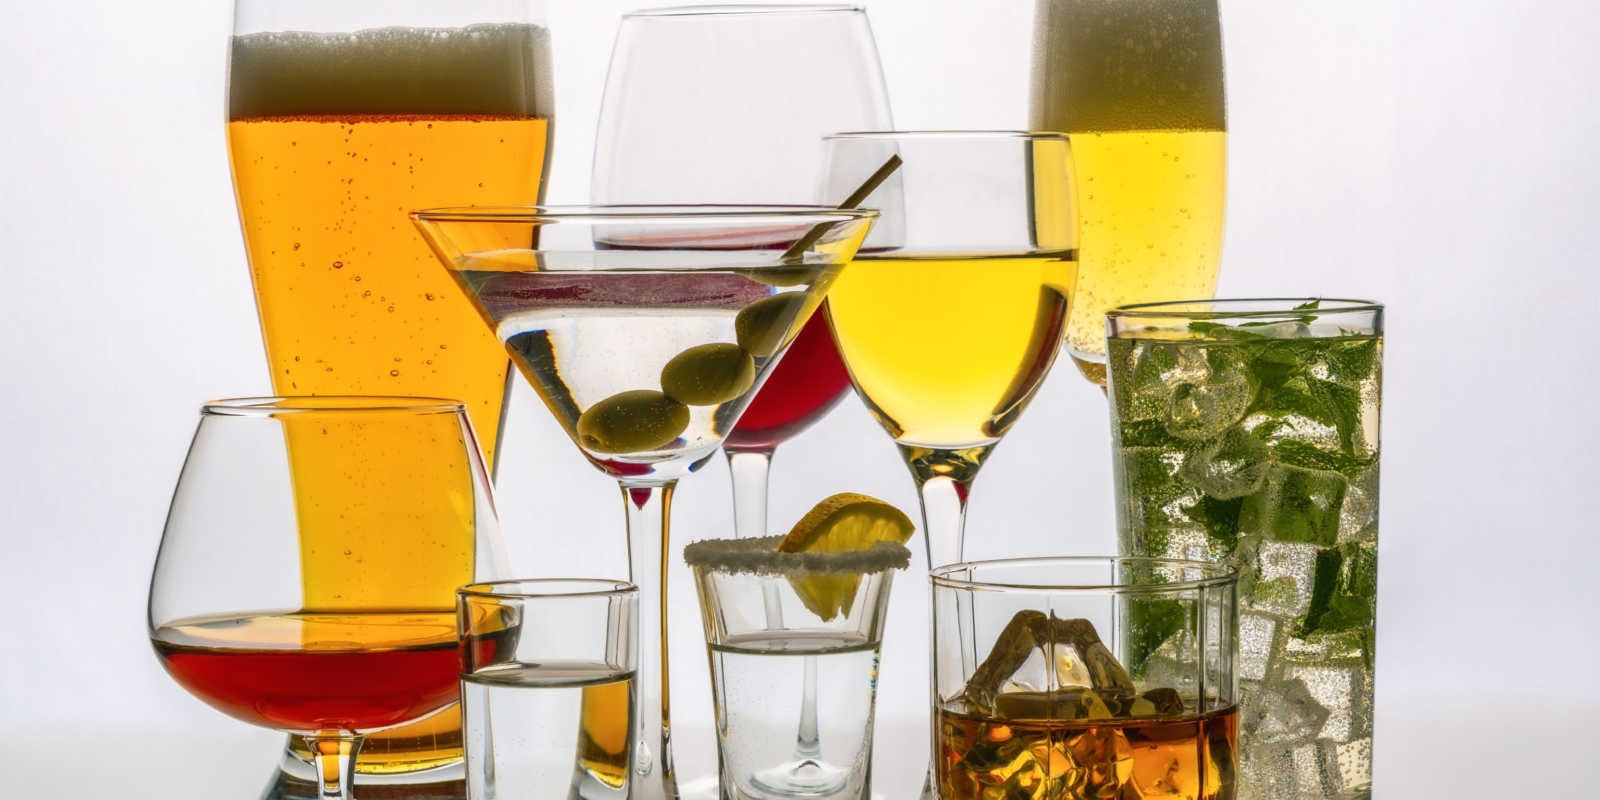 3 Utah Alcohol Laws You Need to Know